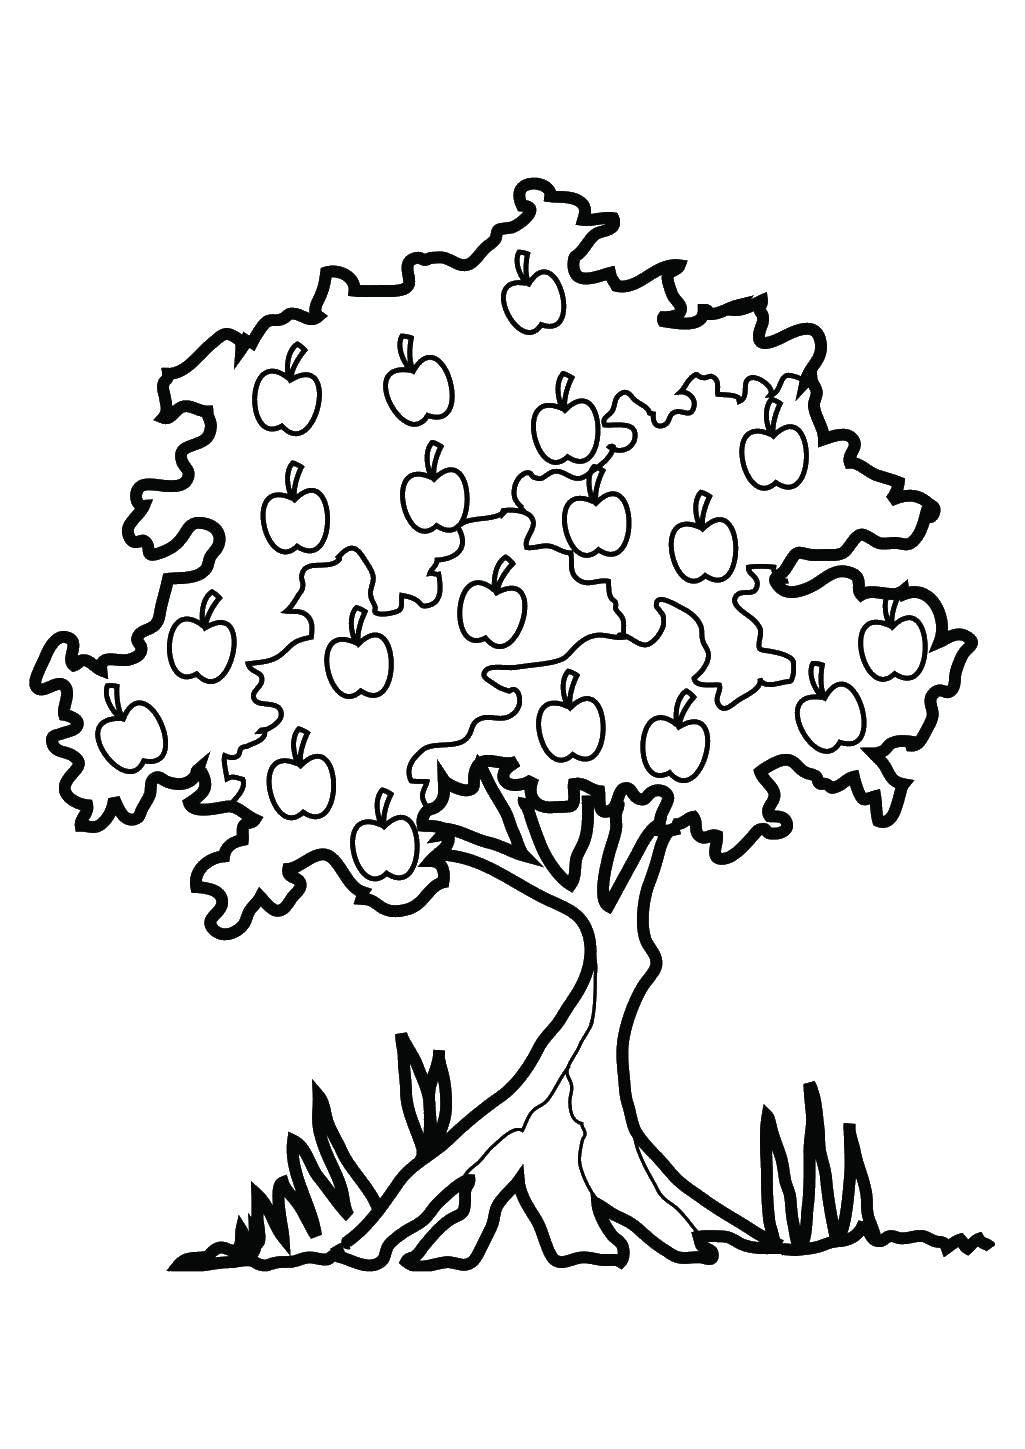 Coloring Apples on the tree. Category tree. Tags:  Apple tree, tree.